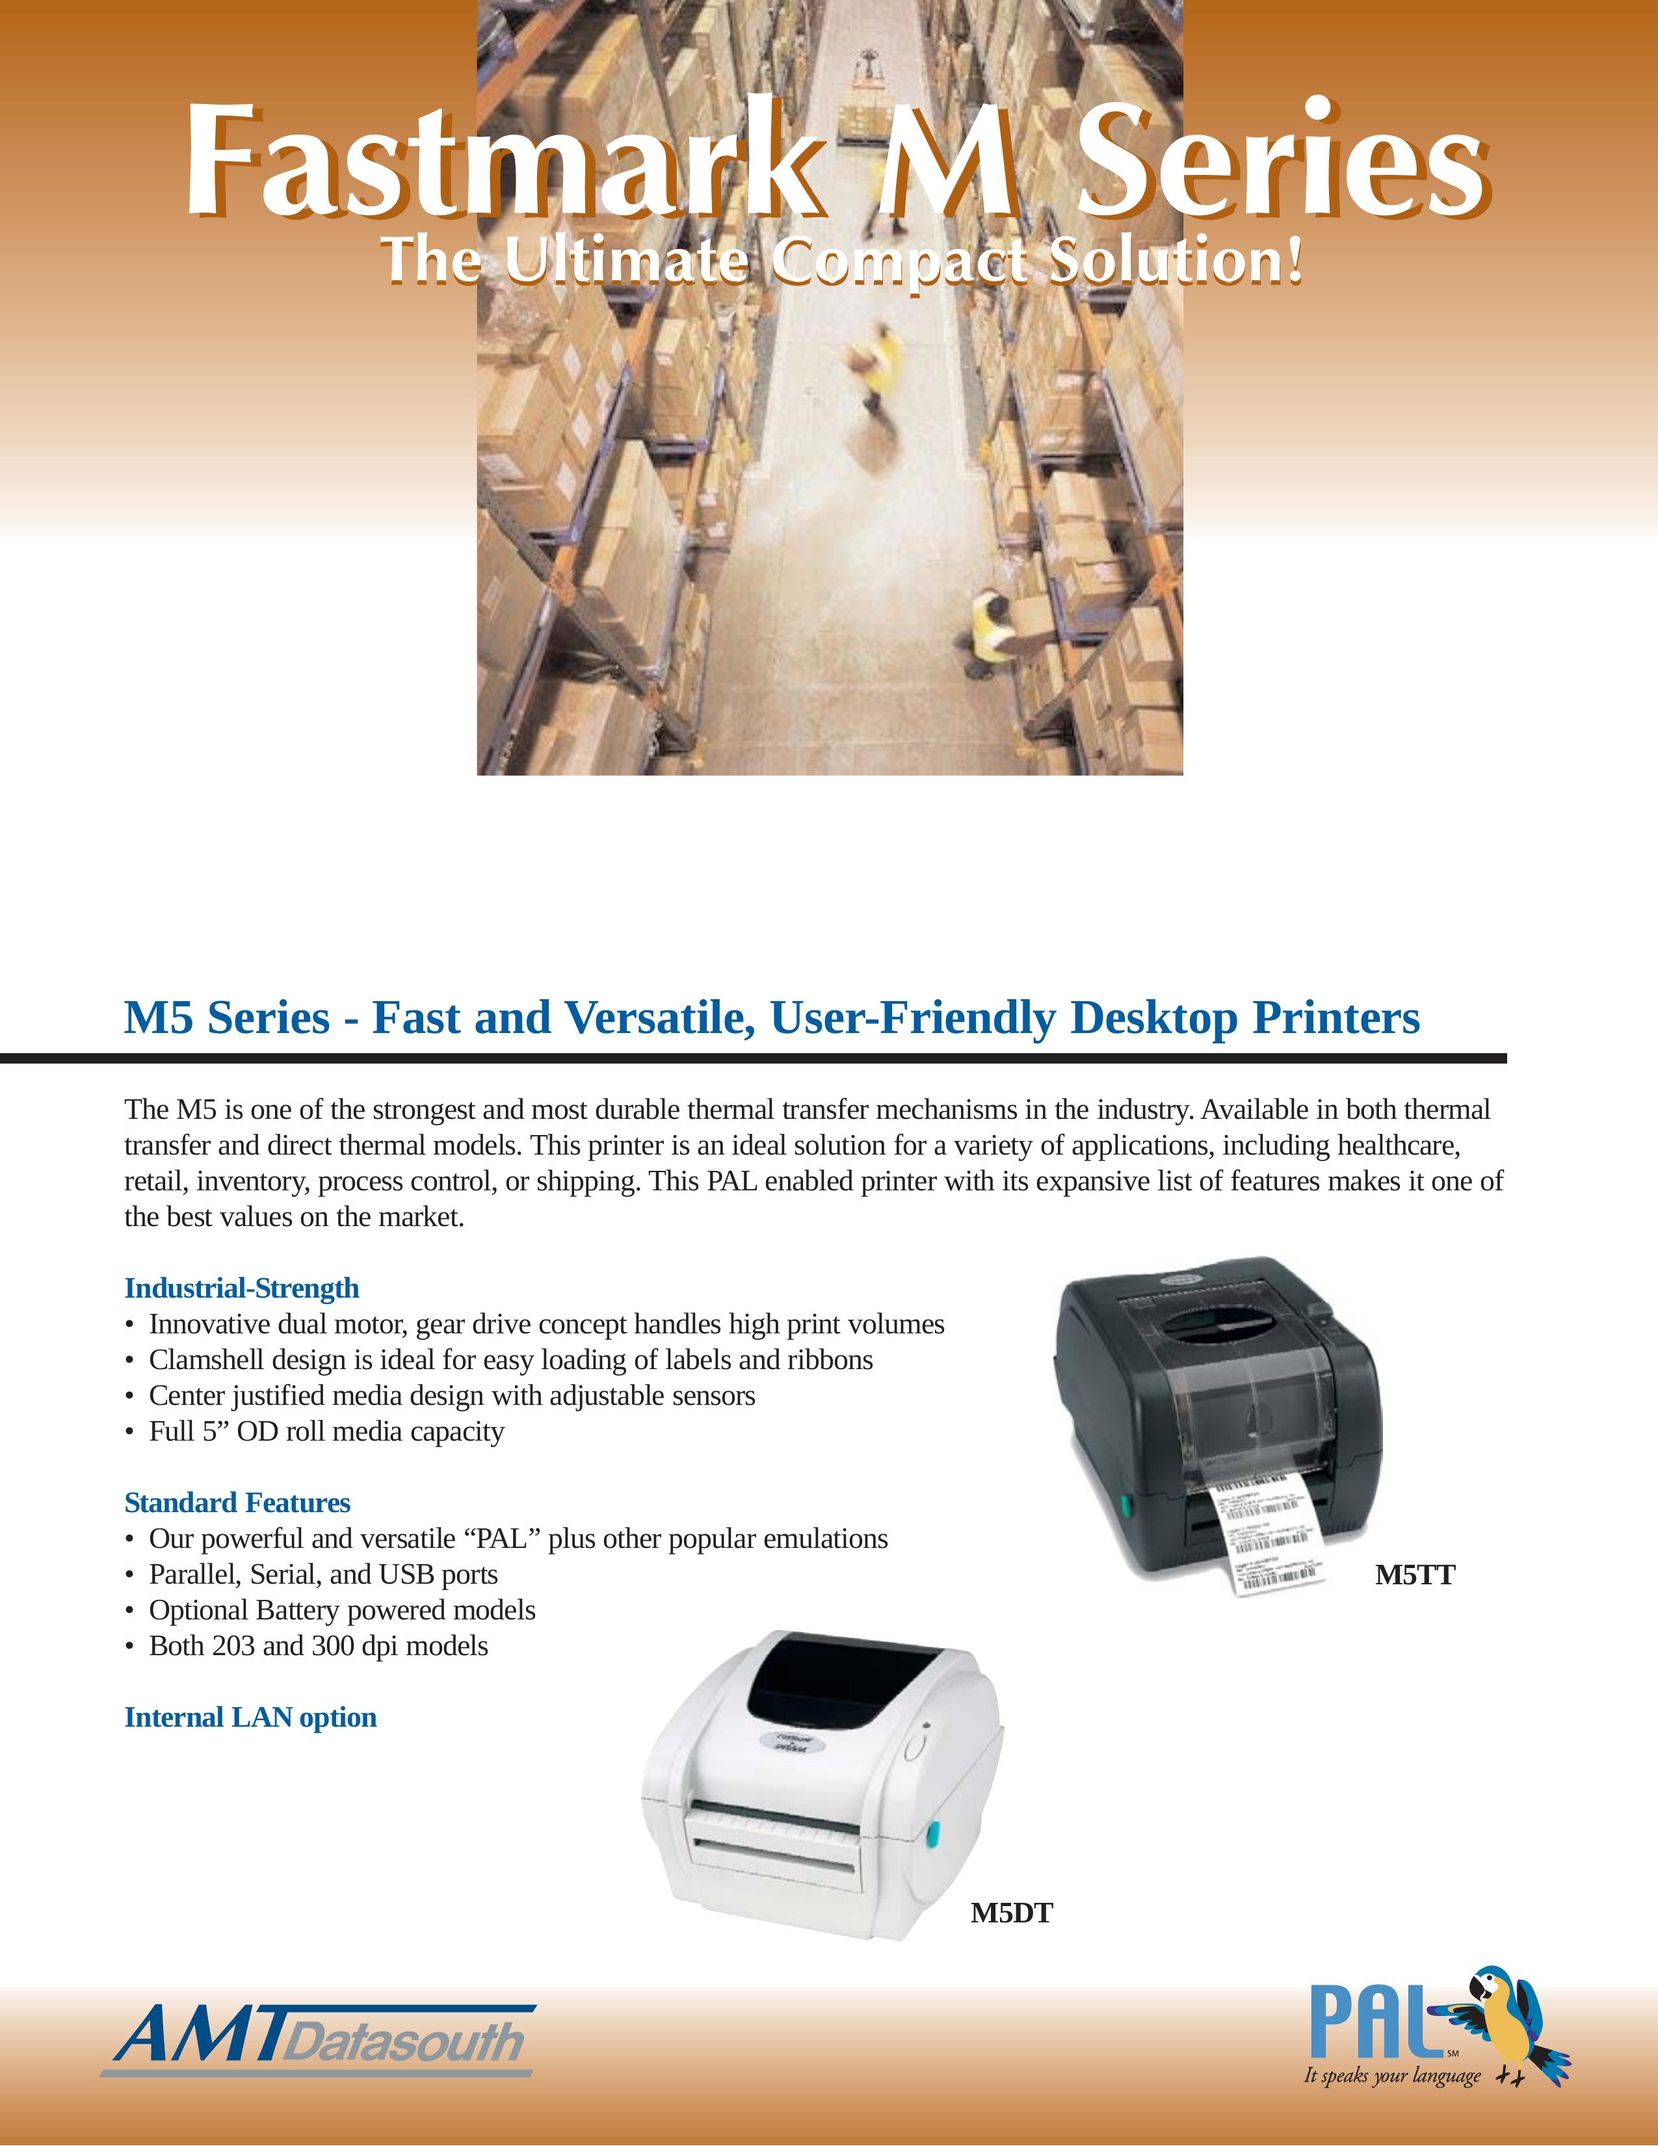 AMT Datasouth M5DT Printer User Manual (Page 1)